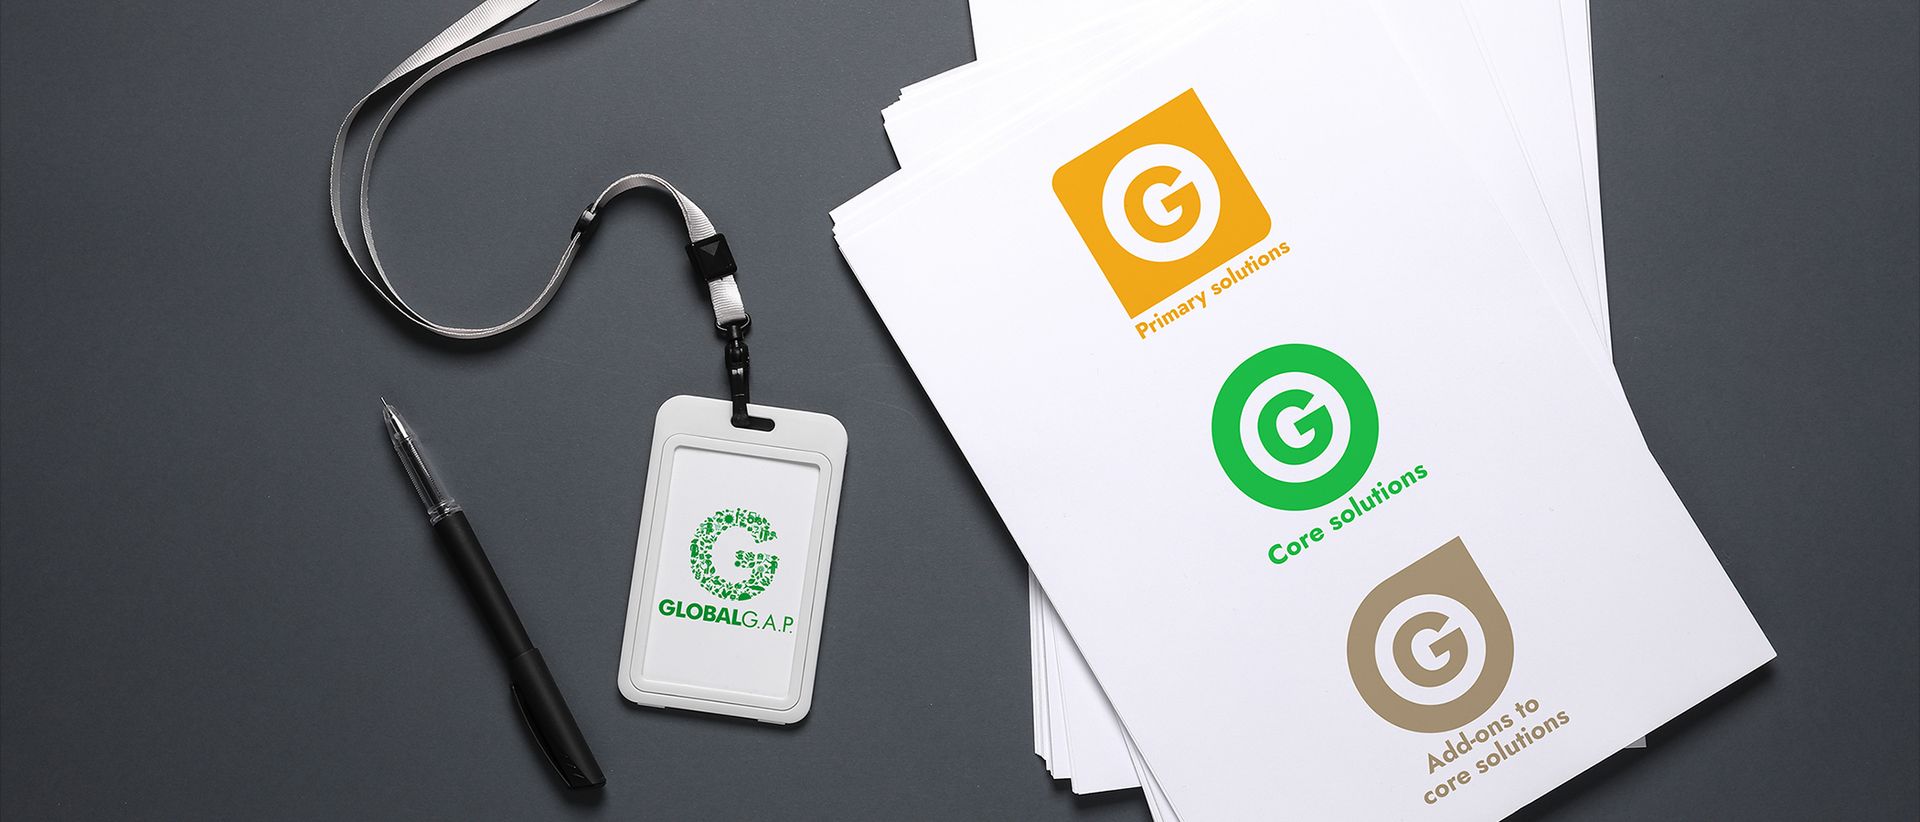 Image of GLOBALG.A.P. solutions icons on marketing materials